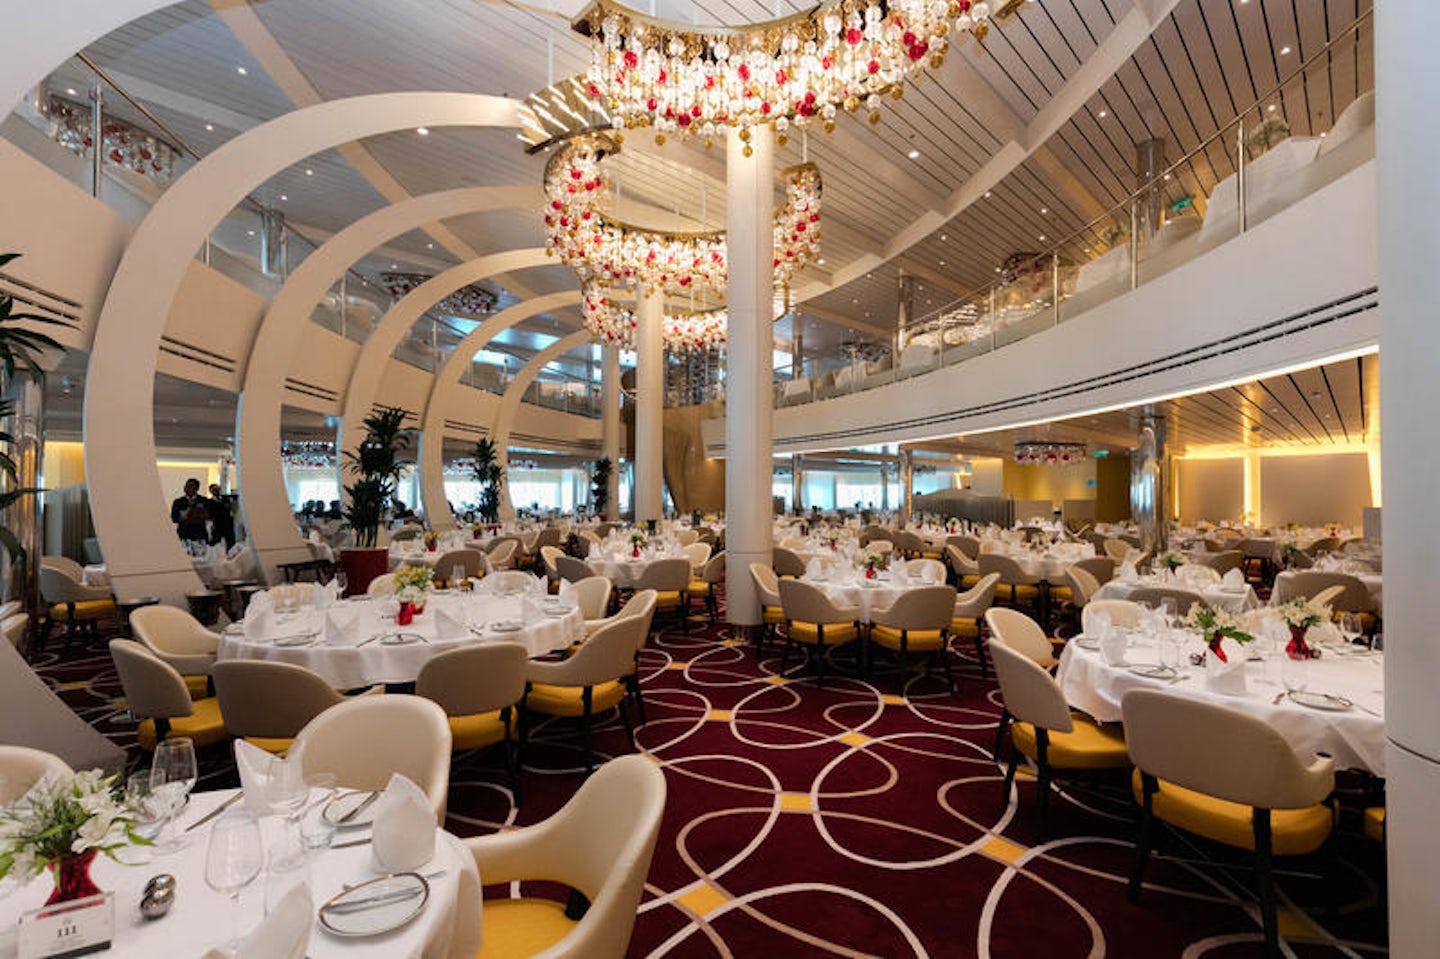 Koningsdam Dining Room Reservations In Advance